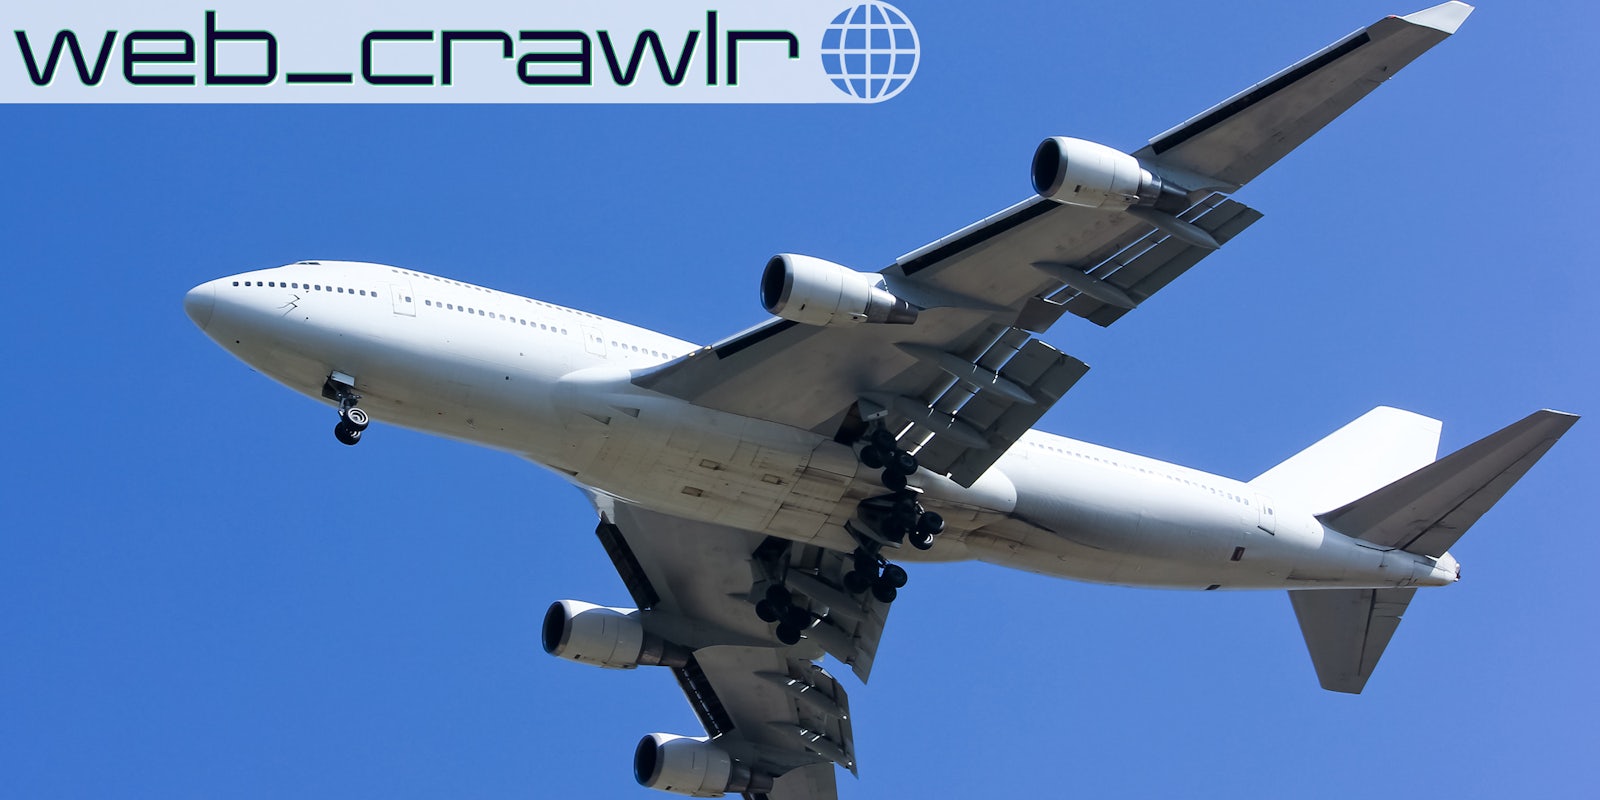 An airplane taking off. The Daily Dot newsletter web_crawlr logo is in the top left corner.